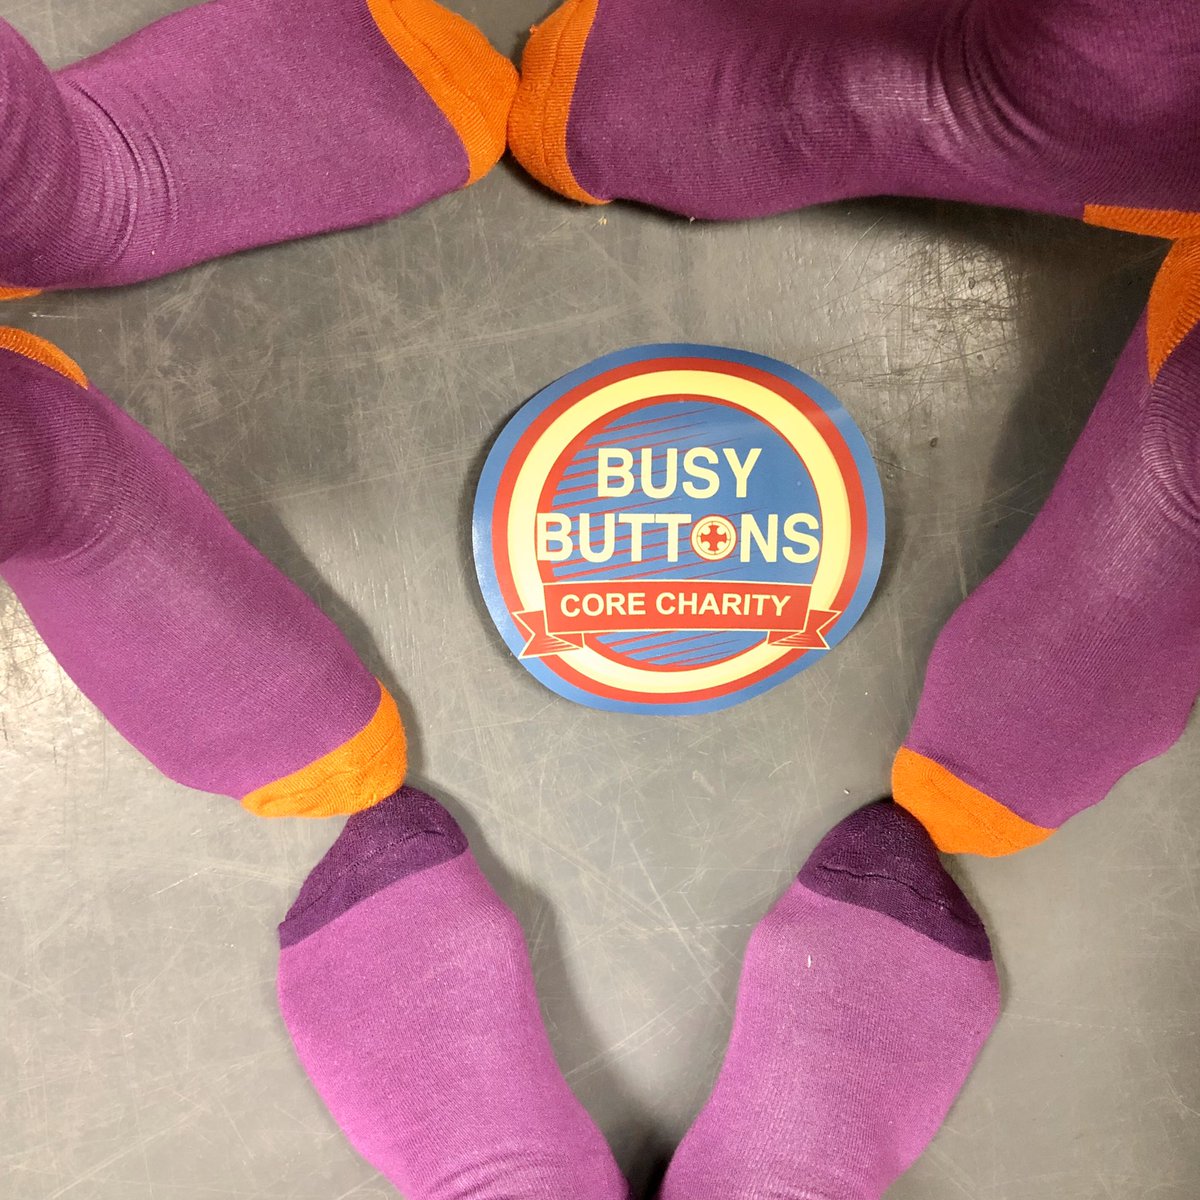 @BusyButtonsCS spotting our fantastic bamboo purple socks supporting #disabilityInclusion at  @ParallelGlobal  with #PurpleSockDay helping disabled entrepreneurs & celebrating #IDPD #InternationalDayofPersonswithDisabilities today Buy your socks at @bam_clothing make a difference